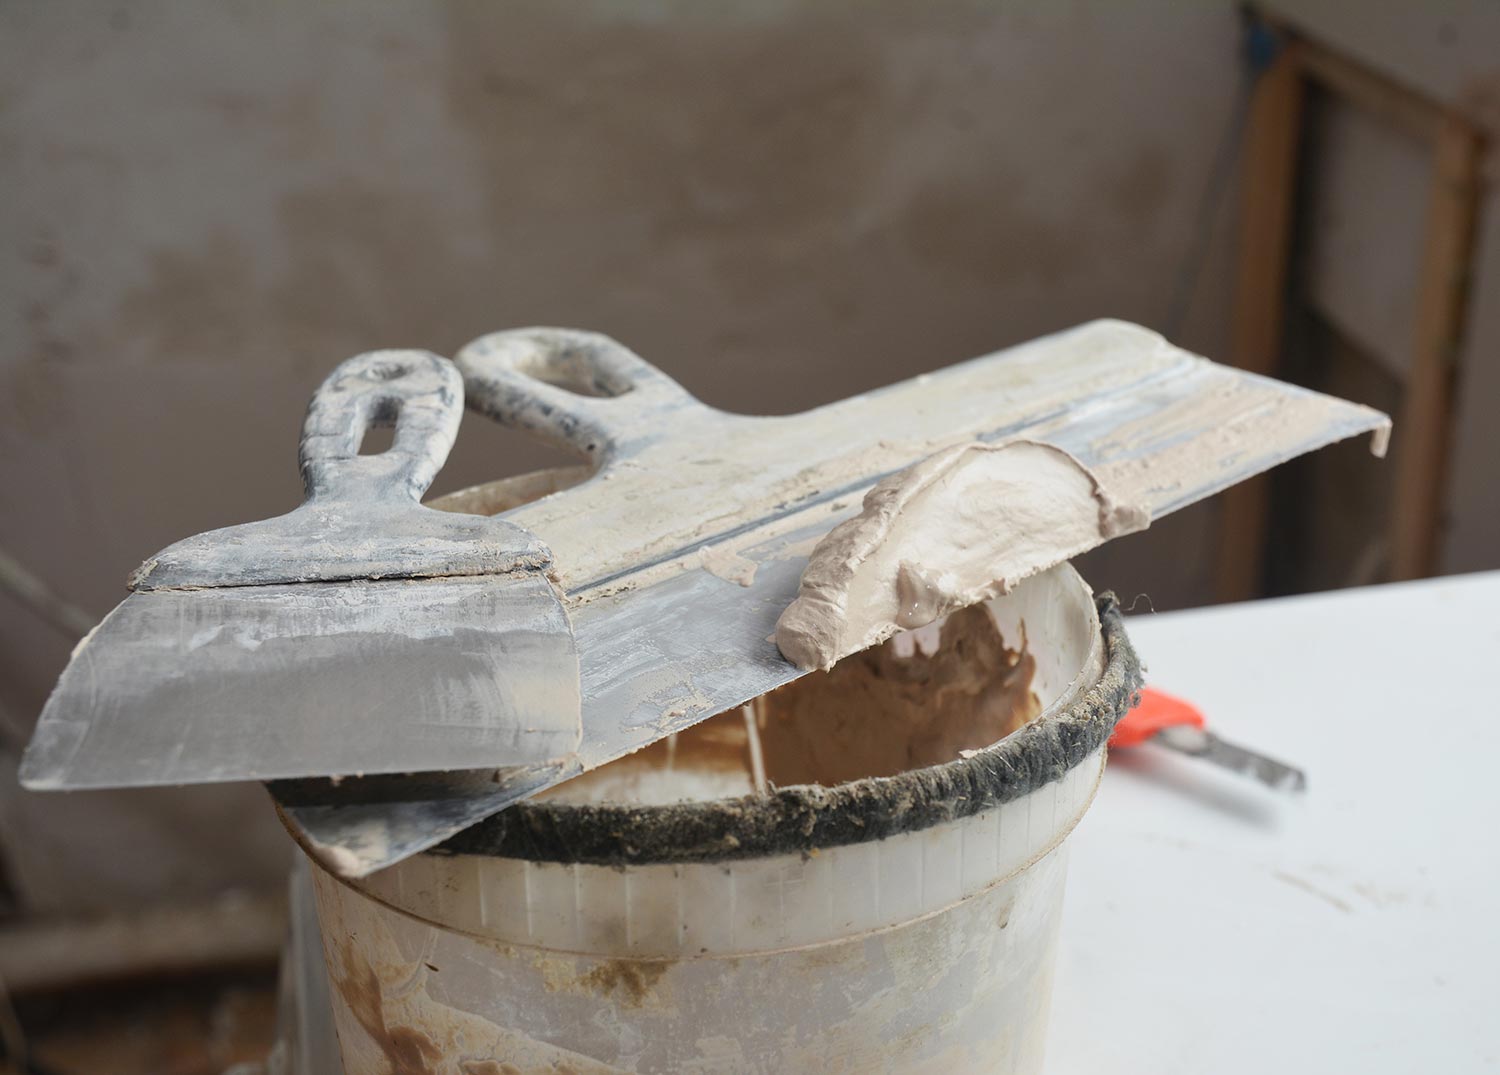 Two taping knives or joint knives, working tool of a builder used to spread joint compound